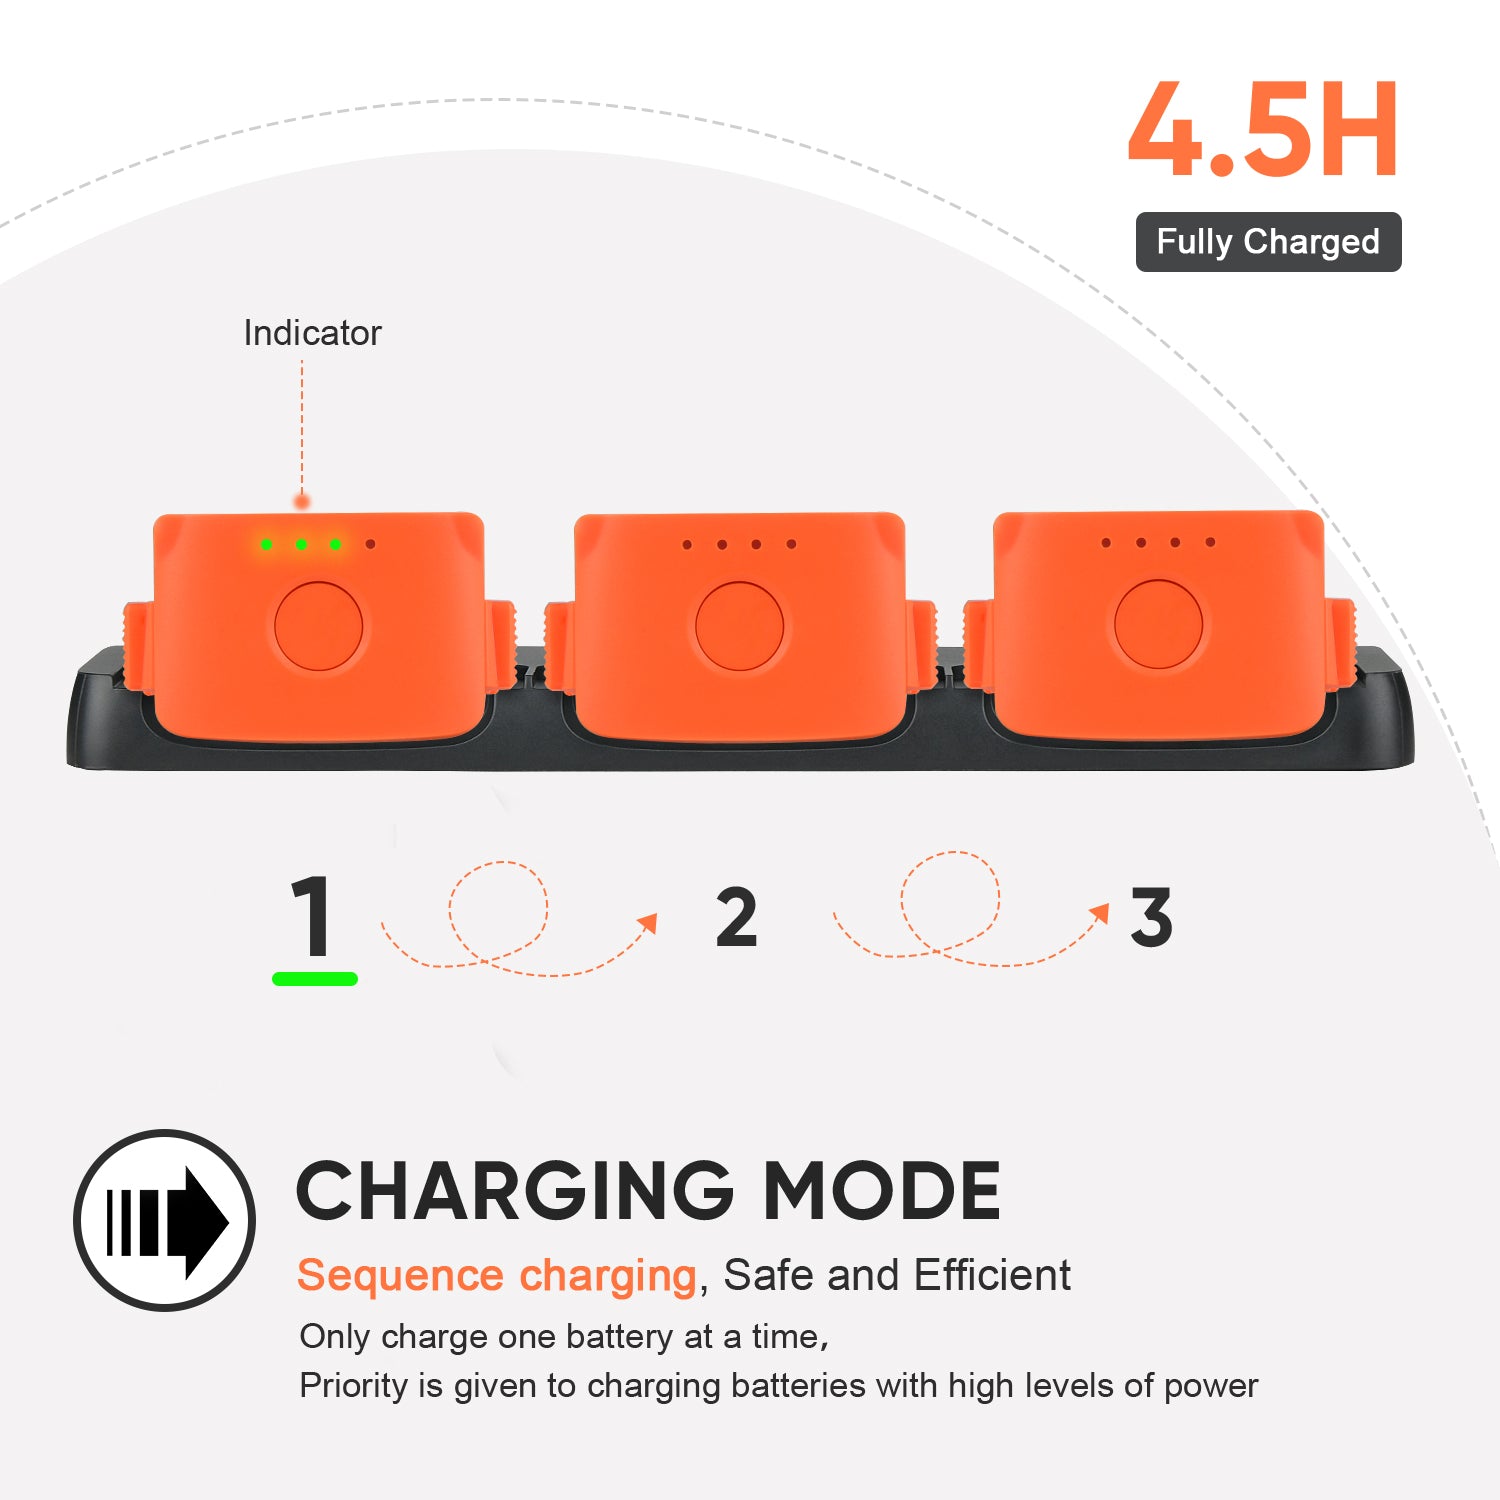 Autel EVO Nano Charging Hub Multi-charger will be fully charged one by one in 4.5 hours